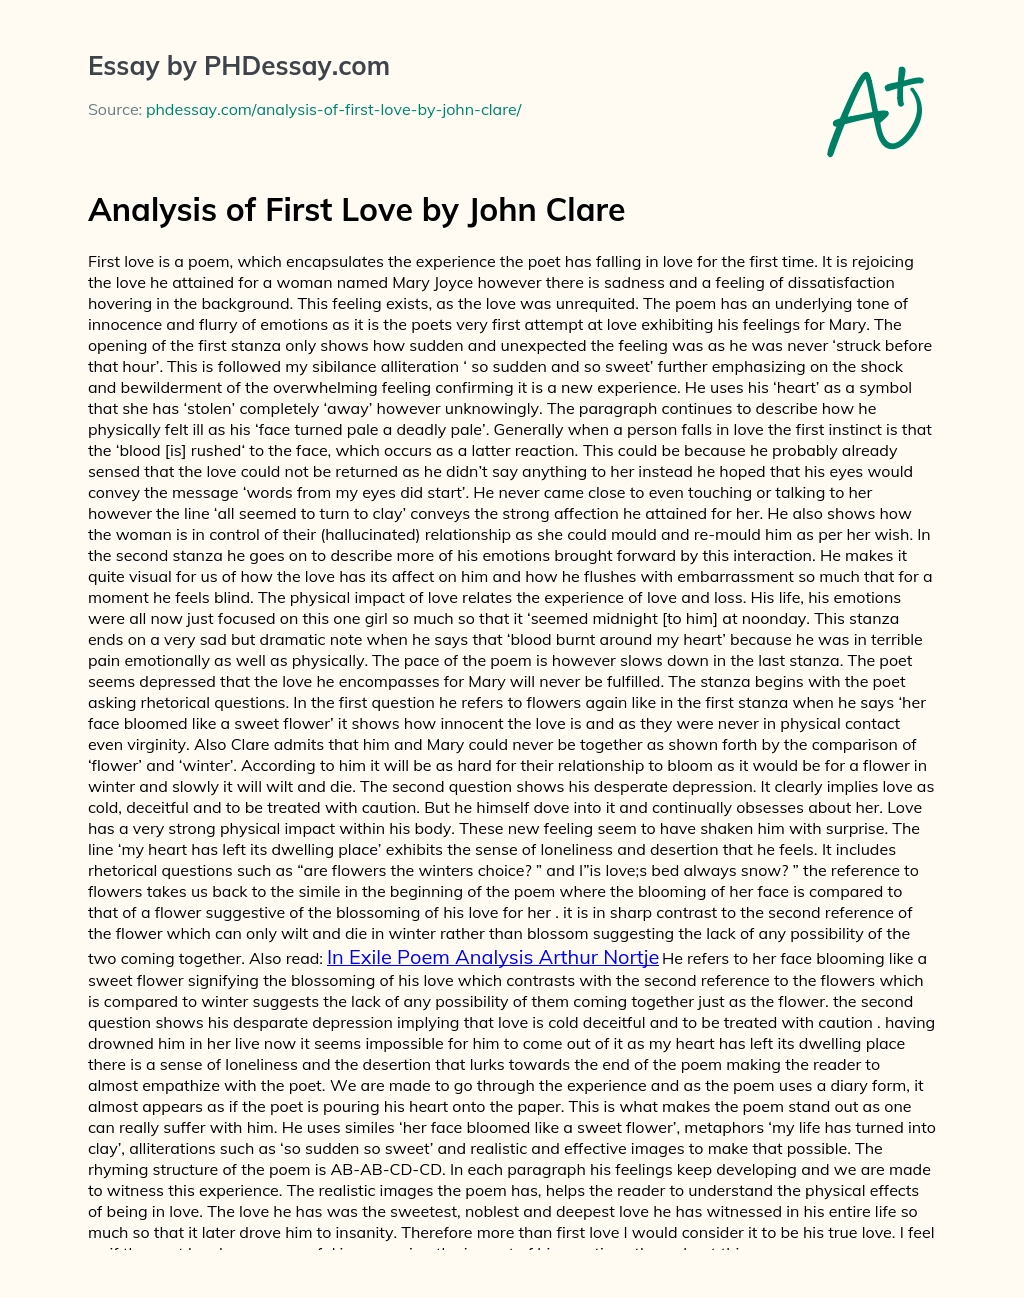 Analysis of First Love by John Clare essay